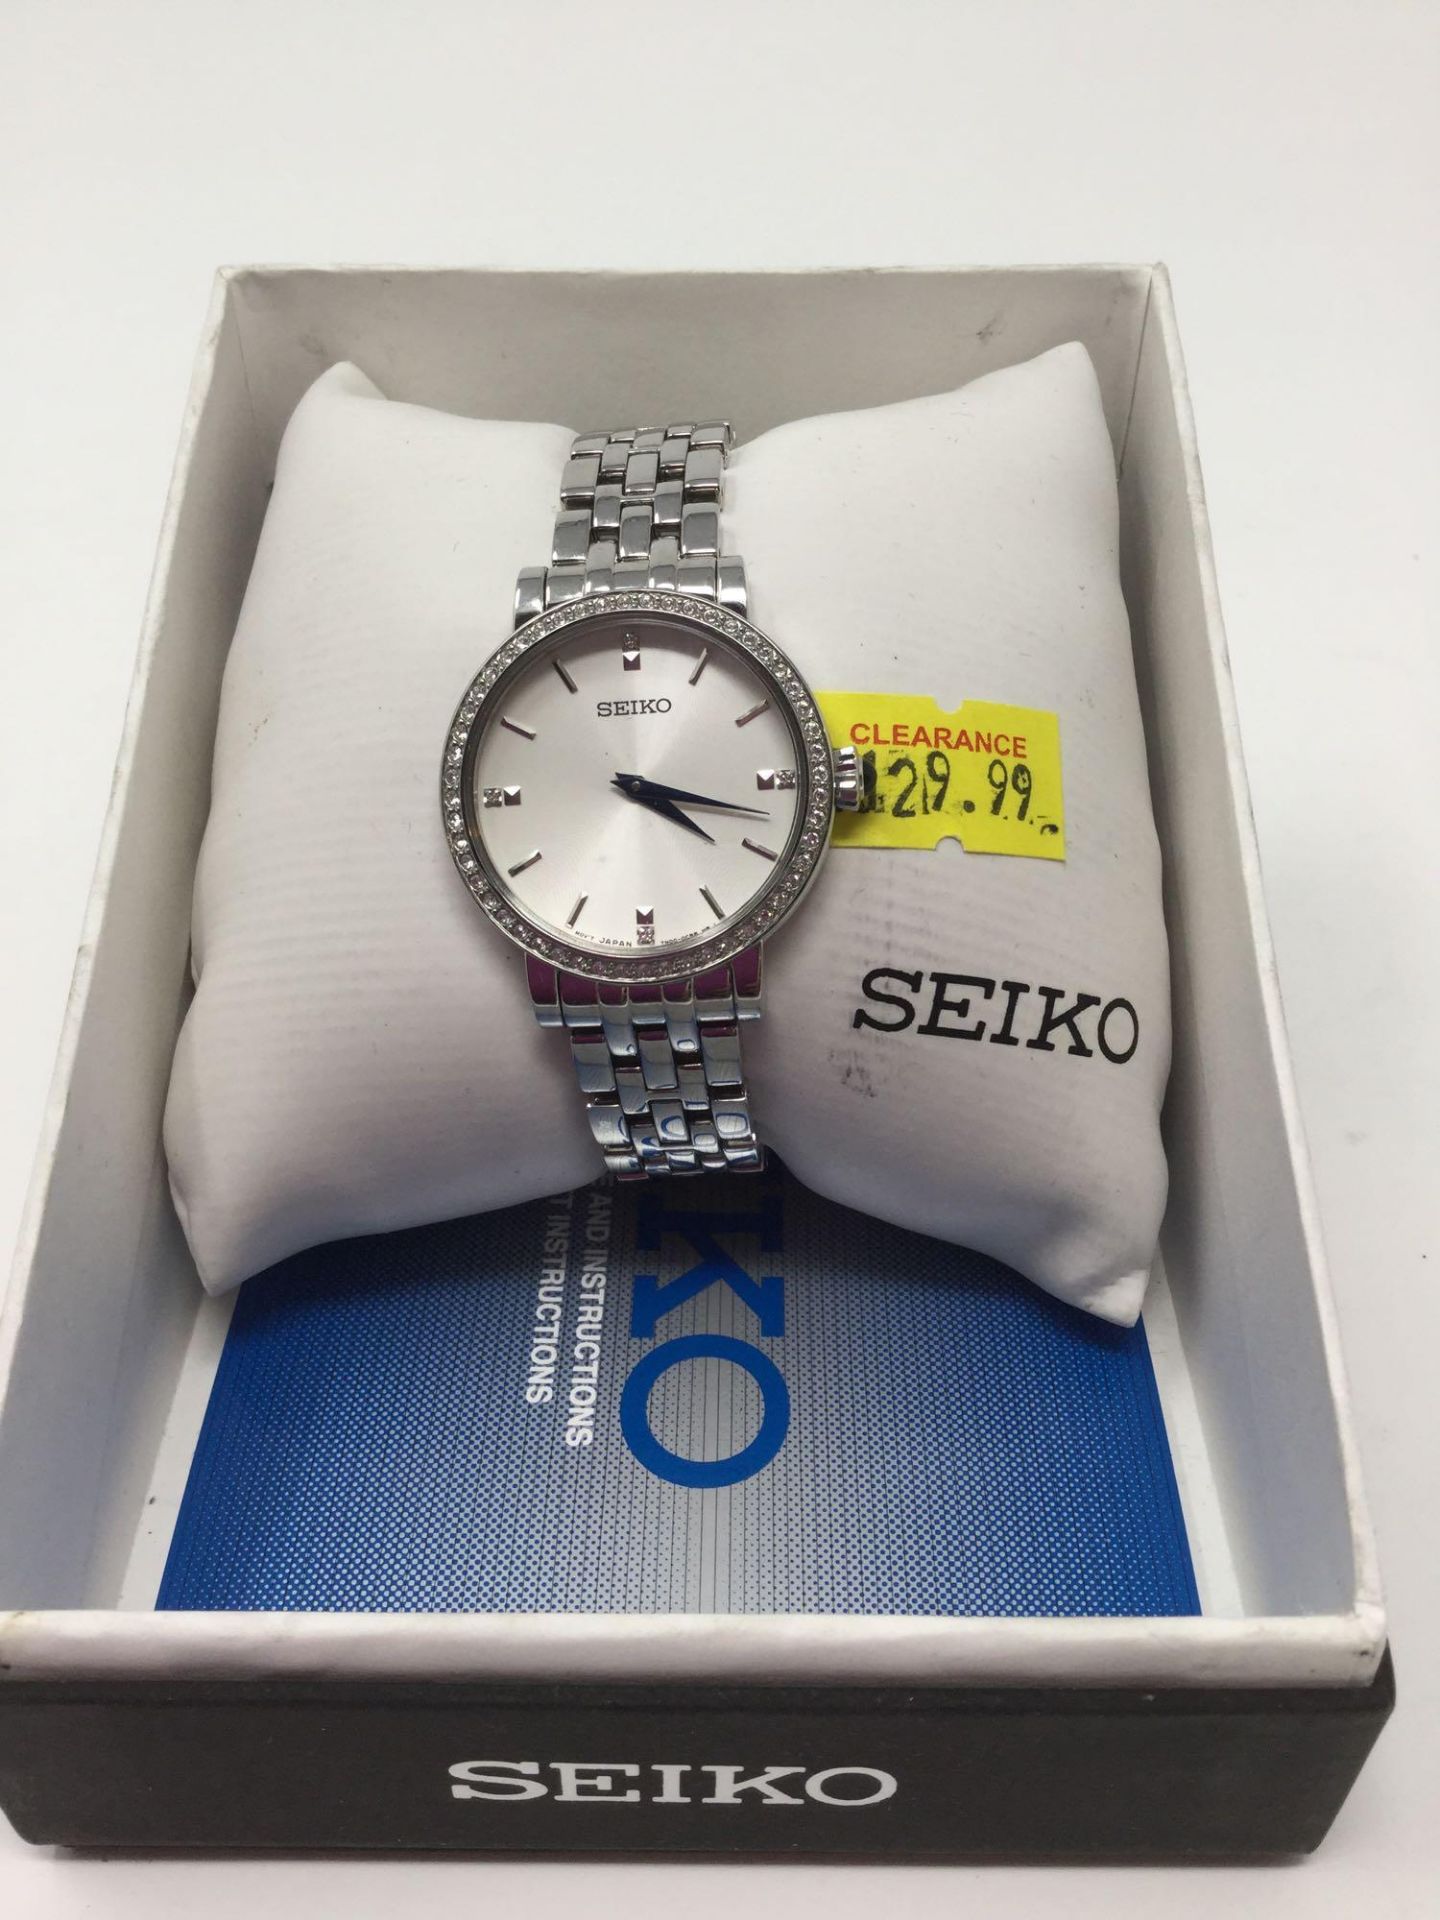 Seiko Watch - Silver Band, Crystals around face, Blue Hands and White Face